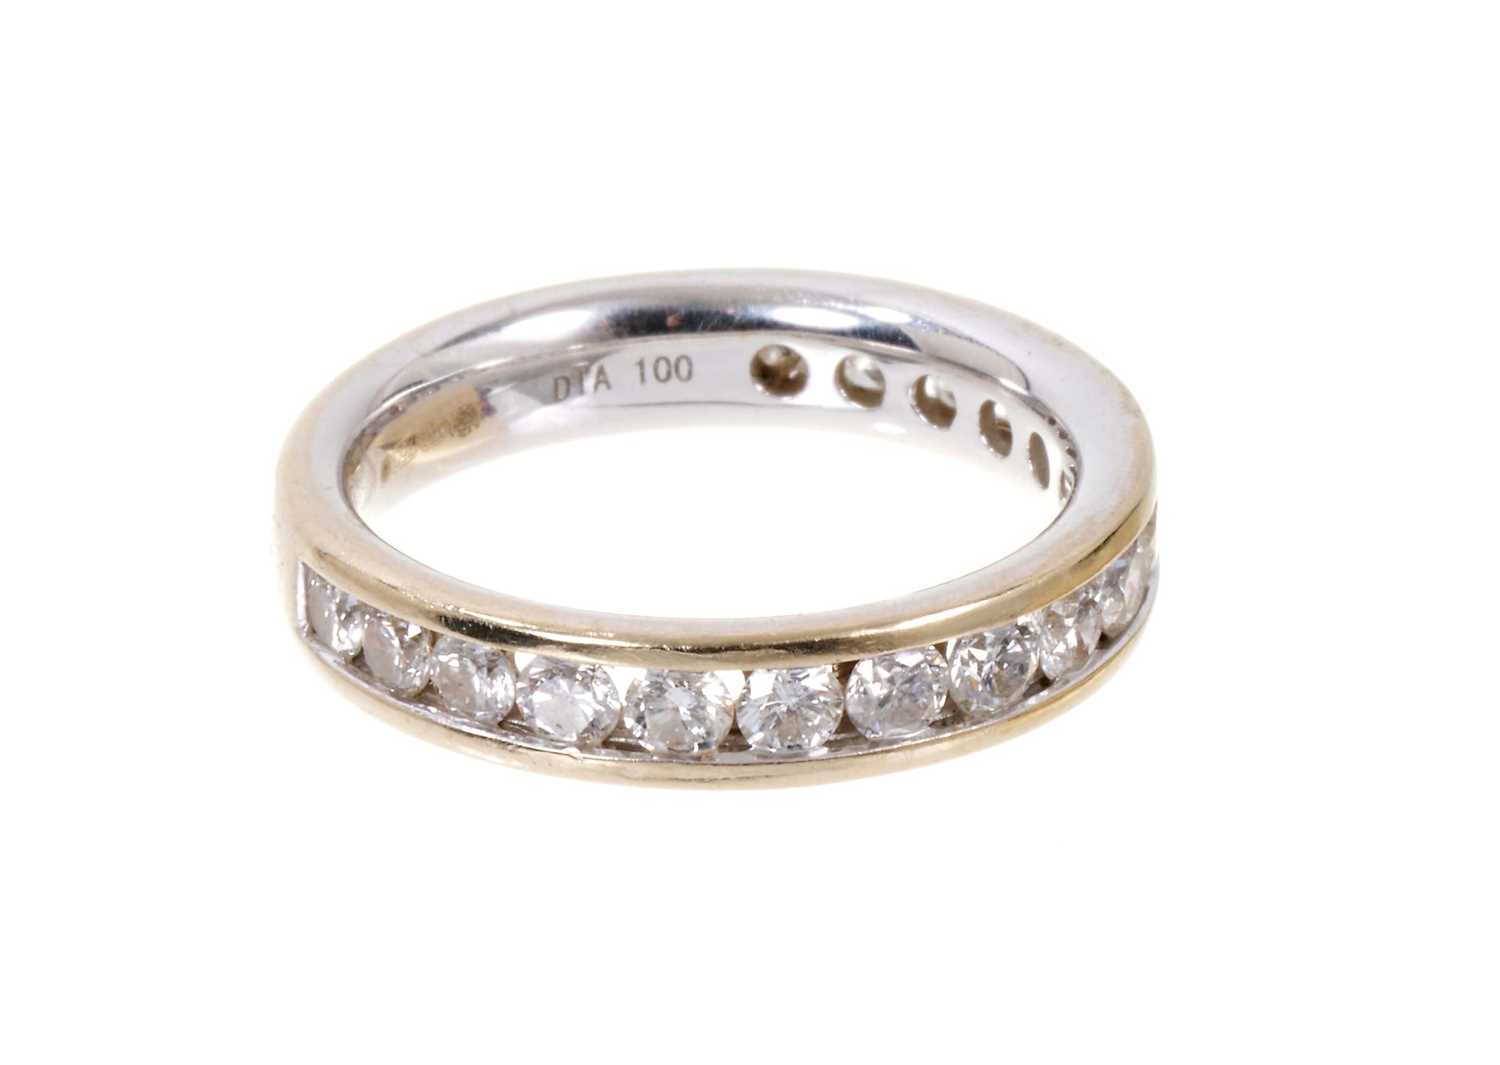 Diamond eternity ring with a band of brilliant cut diamonds in 18ct white gold channel setting